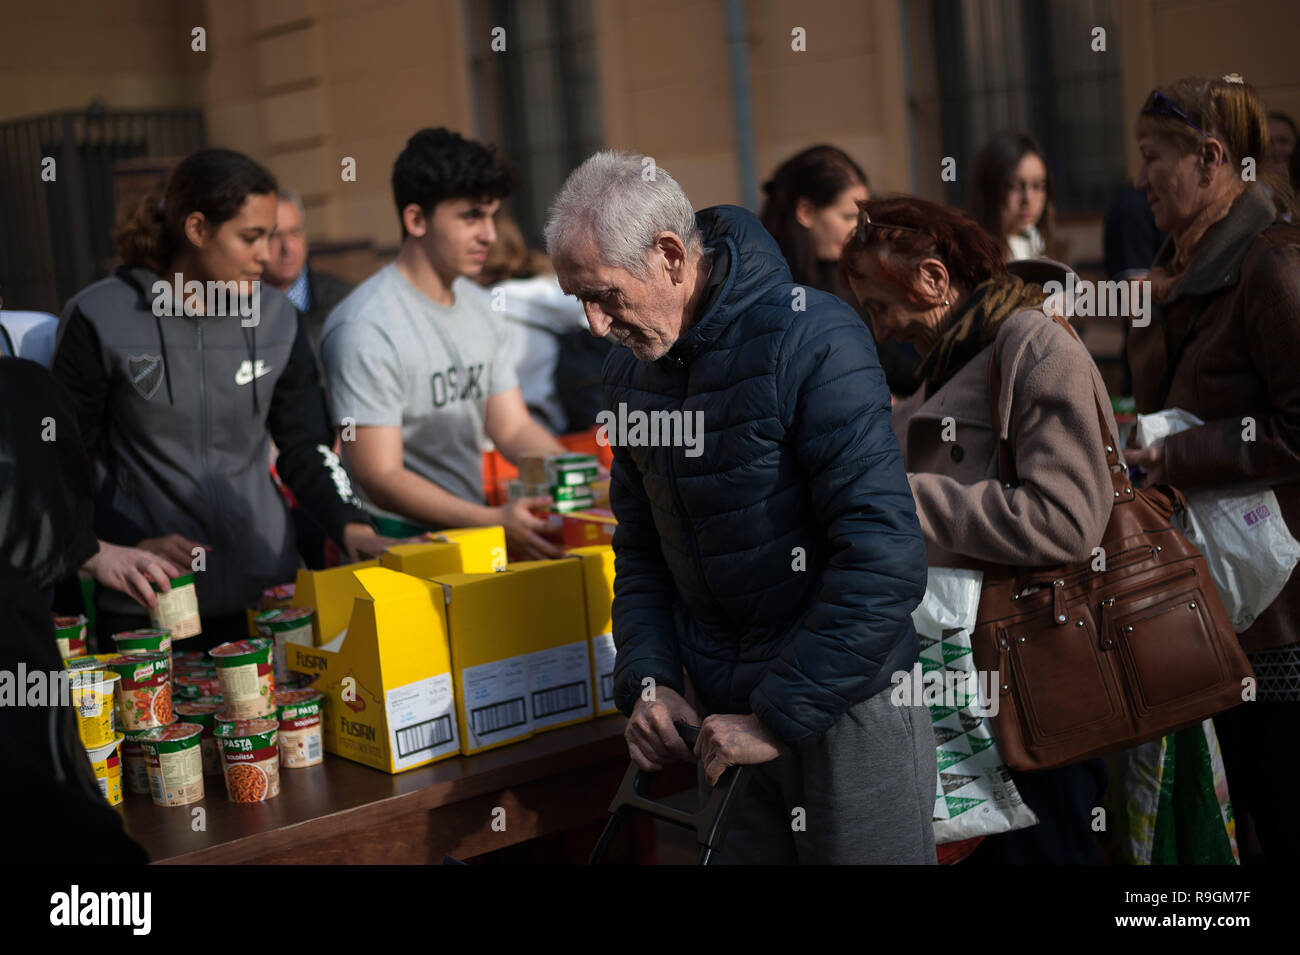 Malaga, Spain. 24th Dec, 2018. An elderly man seen receiveing food from volunteers during the annual charity distribution of food by the NGO 'Ángeles Malagueños de la Noche' (Malaga's Angels of the Night). This organization distribute every 24th of December on Christmas eve hundreds of food to needy people in the city. Credit: SOPA Images Limited/Alamy Live News Stock Photo